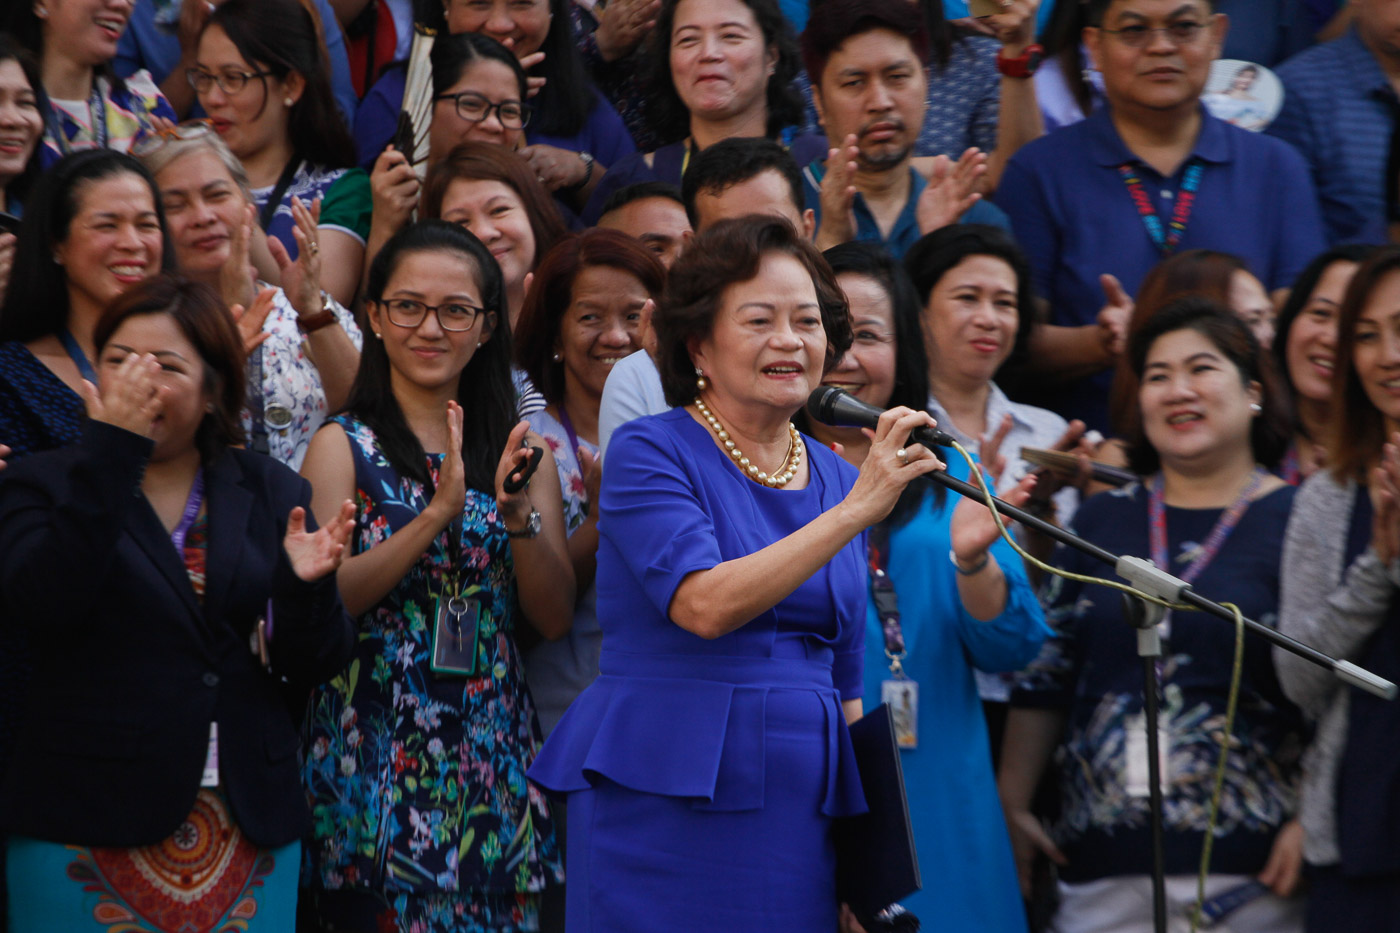 CEREMONIES. Outgoing Chief Justice Teresita Leonardo de Castro is met with applause in her farewell speech at the Supreme Court on October 8, 2018. Photo by Ben Nabong/Rappler  